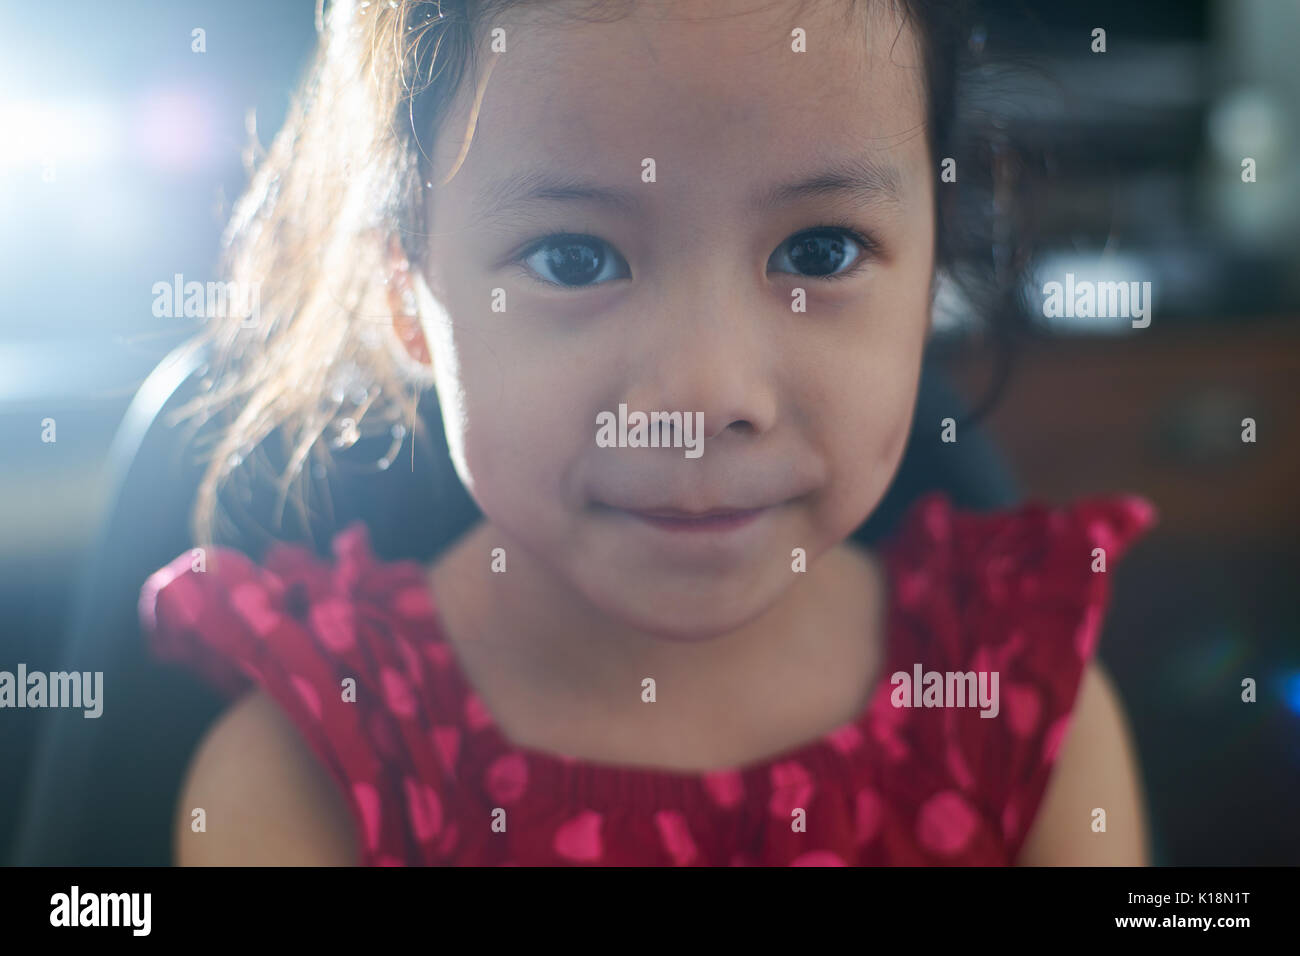 Chinese Little Girl Stock Photos & Chinese Little Girl Stock Images - Alamy